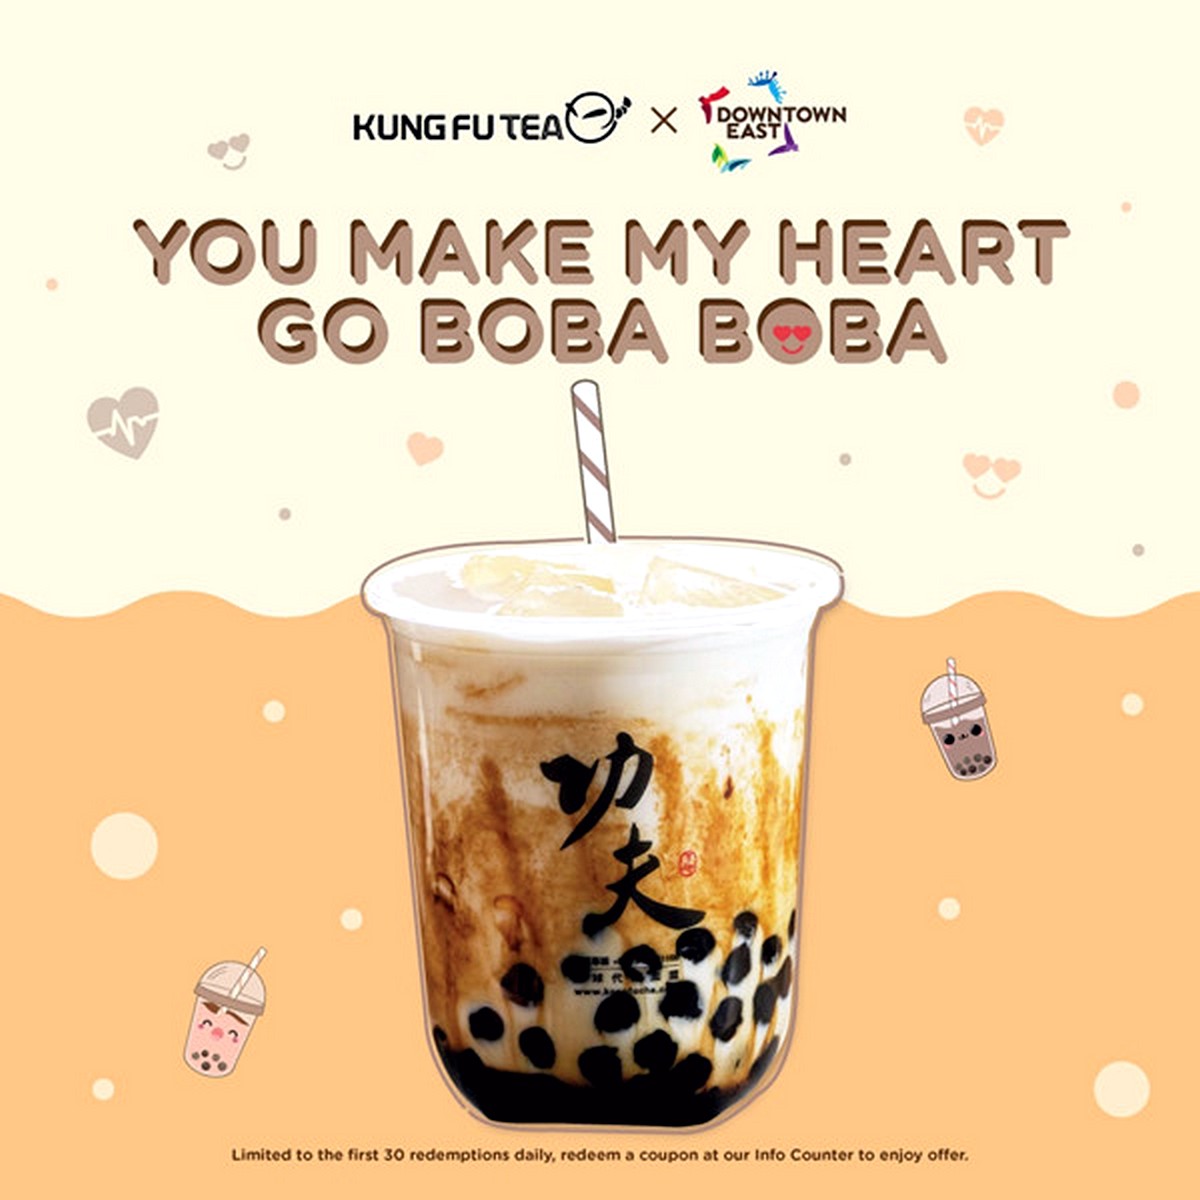 Downtown-East-Free-Bubble-Tea-Promotion-2020-Giveaway-Freebies-2021-Discounts-Offers-004 16-31 Mar 2020: Downtown East FREE Bubble Tea Promotion! KOI The, Kung Fu Tea, Each A Cup, Tea Valley & Yocha!